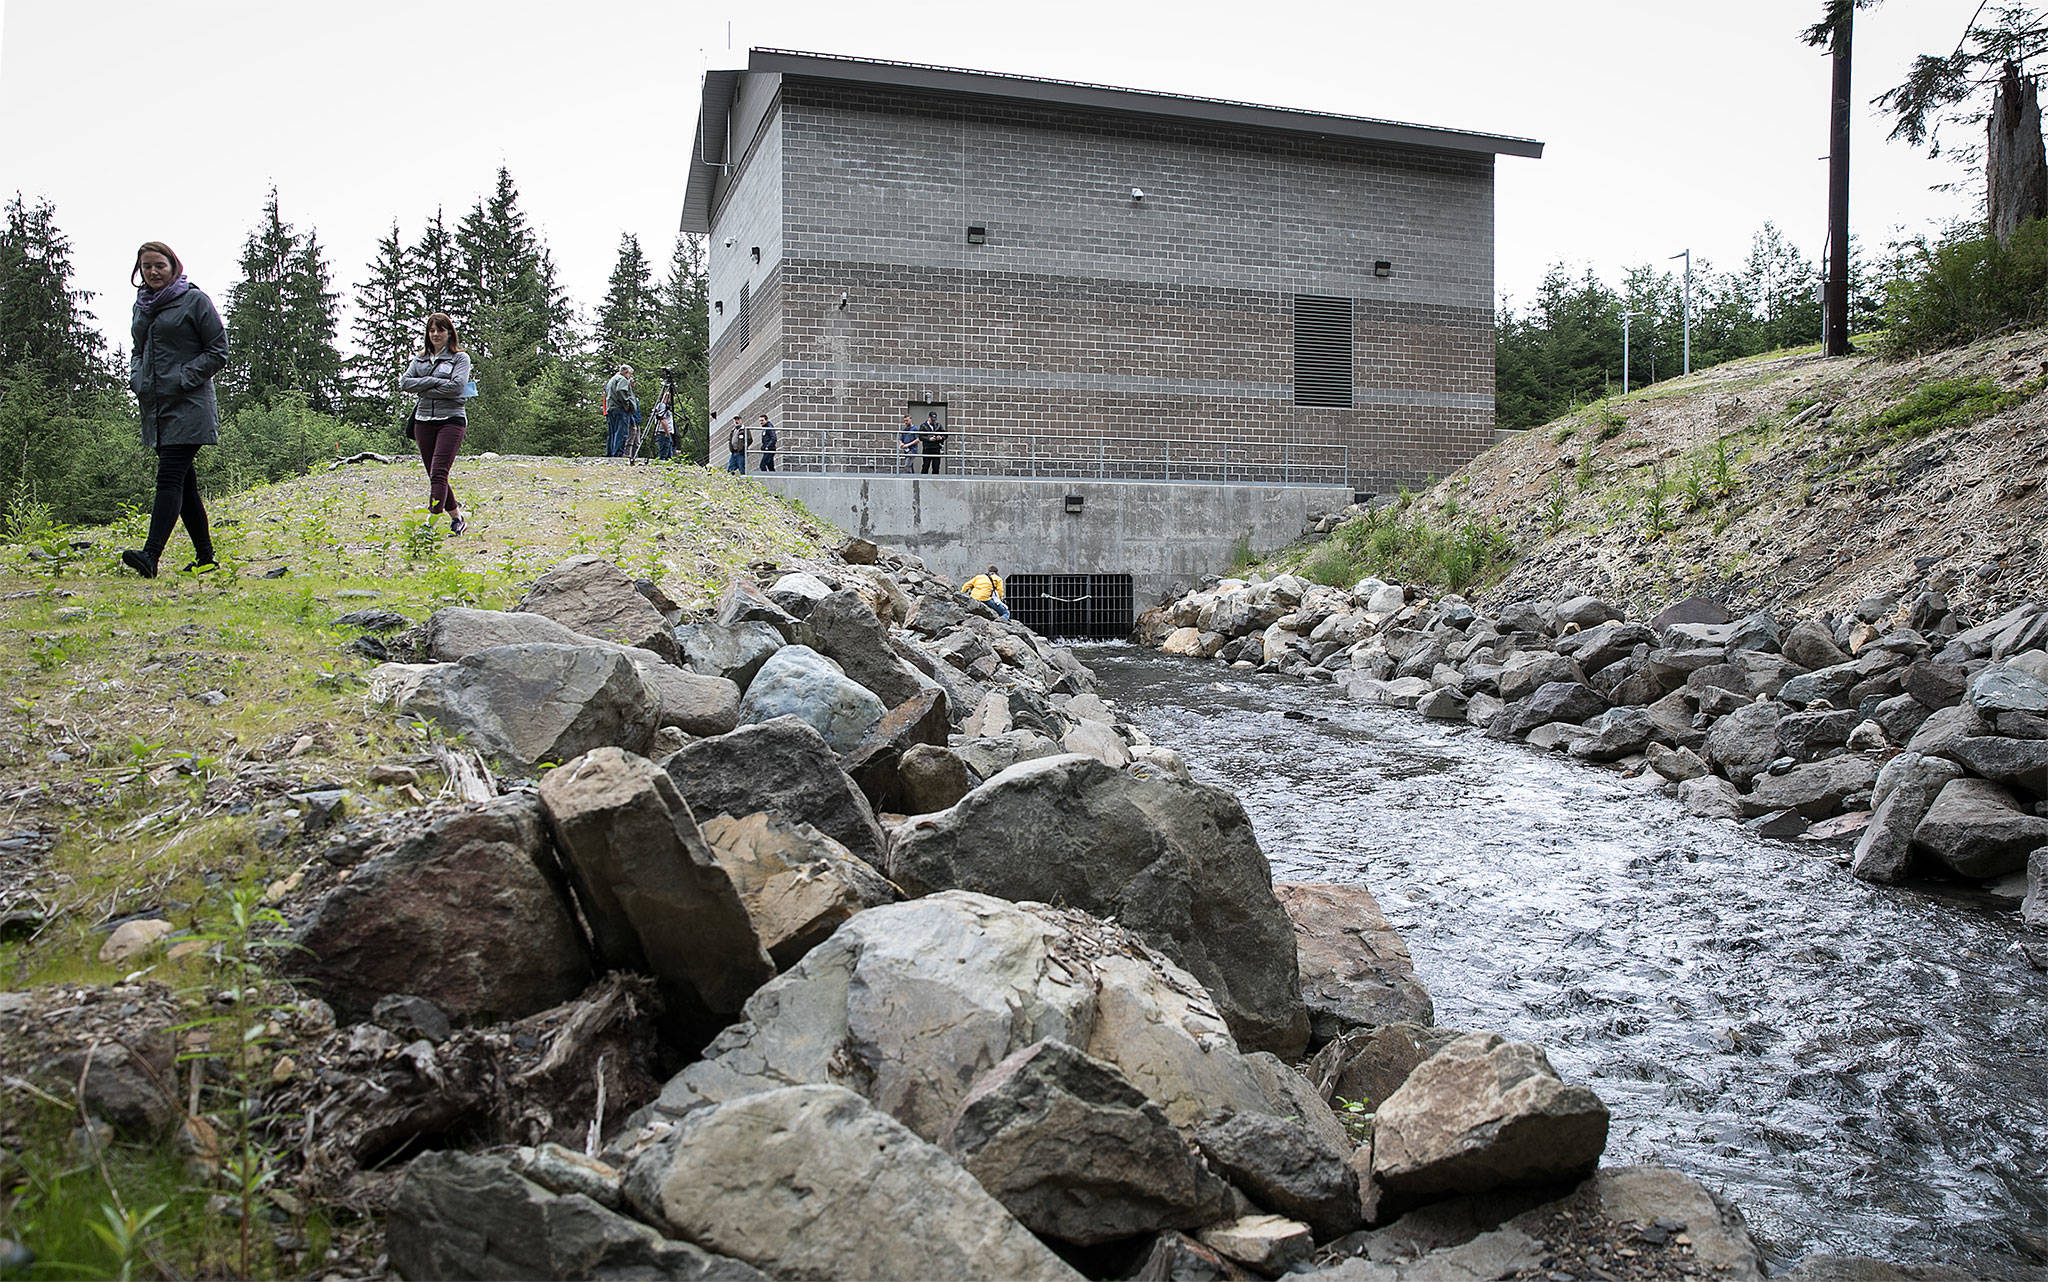 Water is returned to the creek after producing power at the Calligan Creek Hydro Project powerhouse in King County. (Lizz Giordano / The Herald)